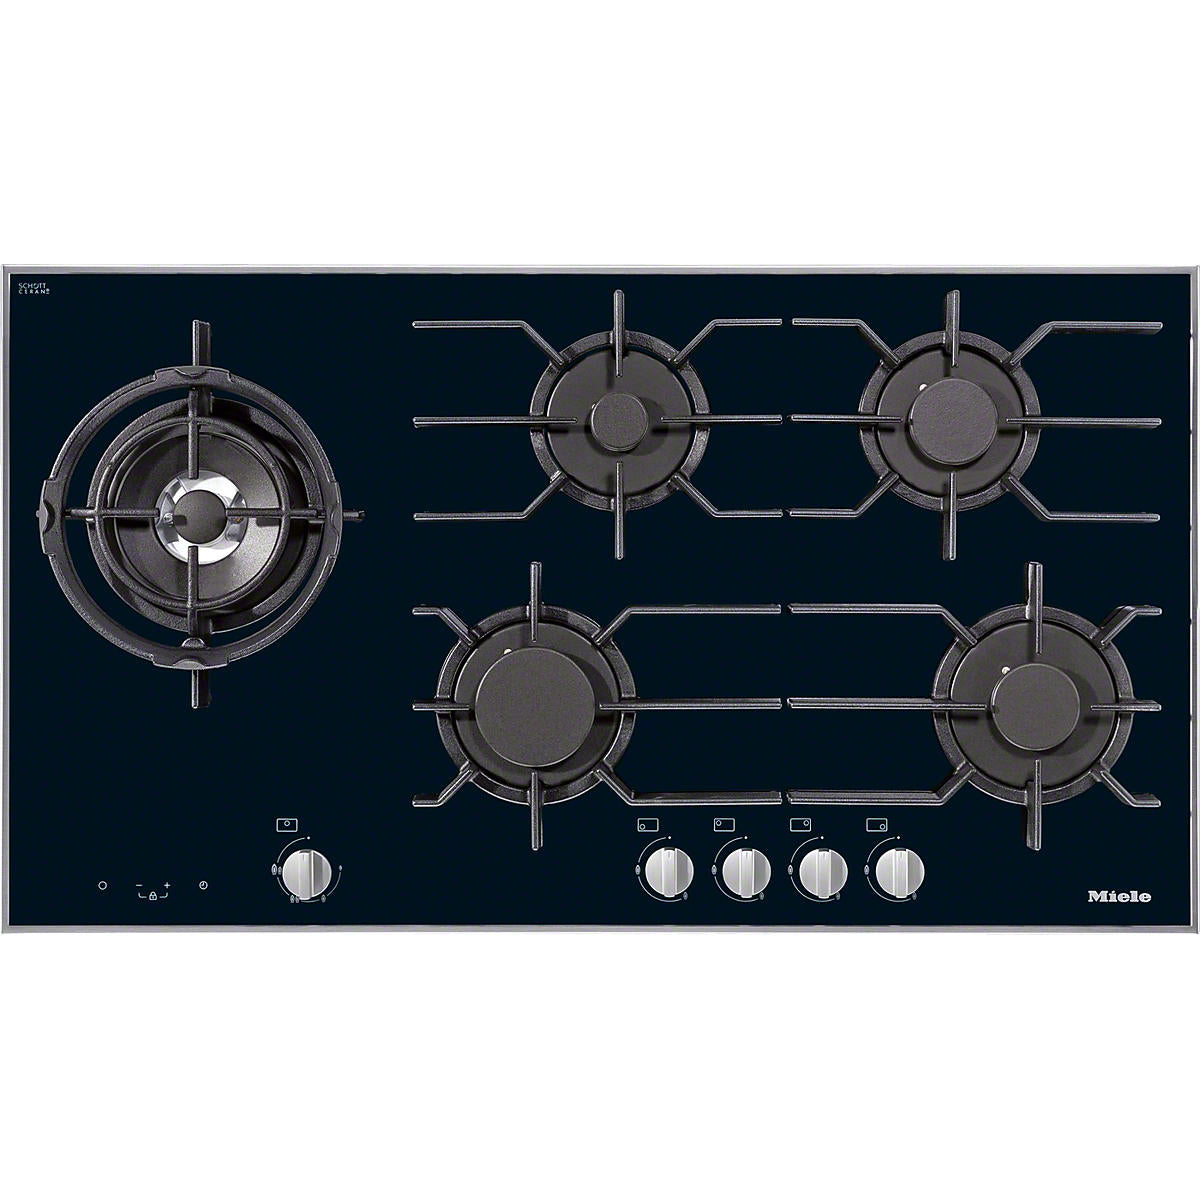 Miele 94.2cm 5 Zone Gas Hob KM3054-1 Black Stainless Steel Finish